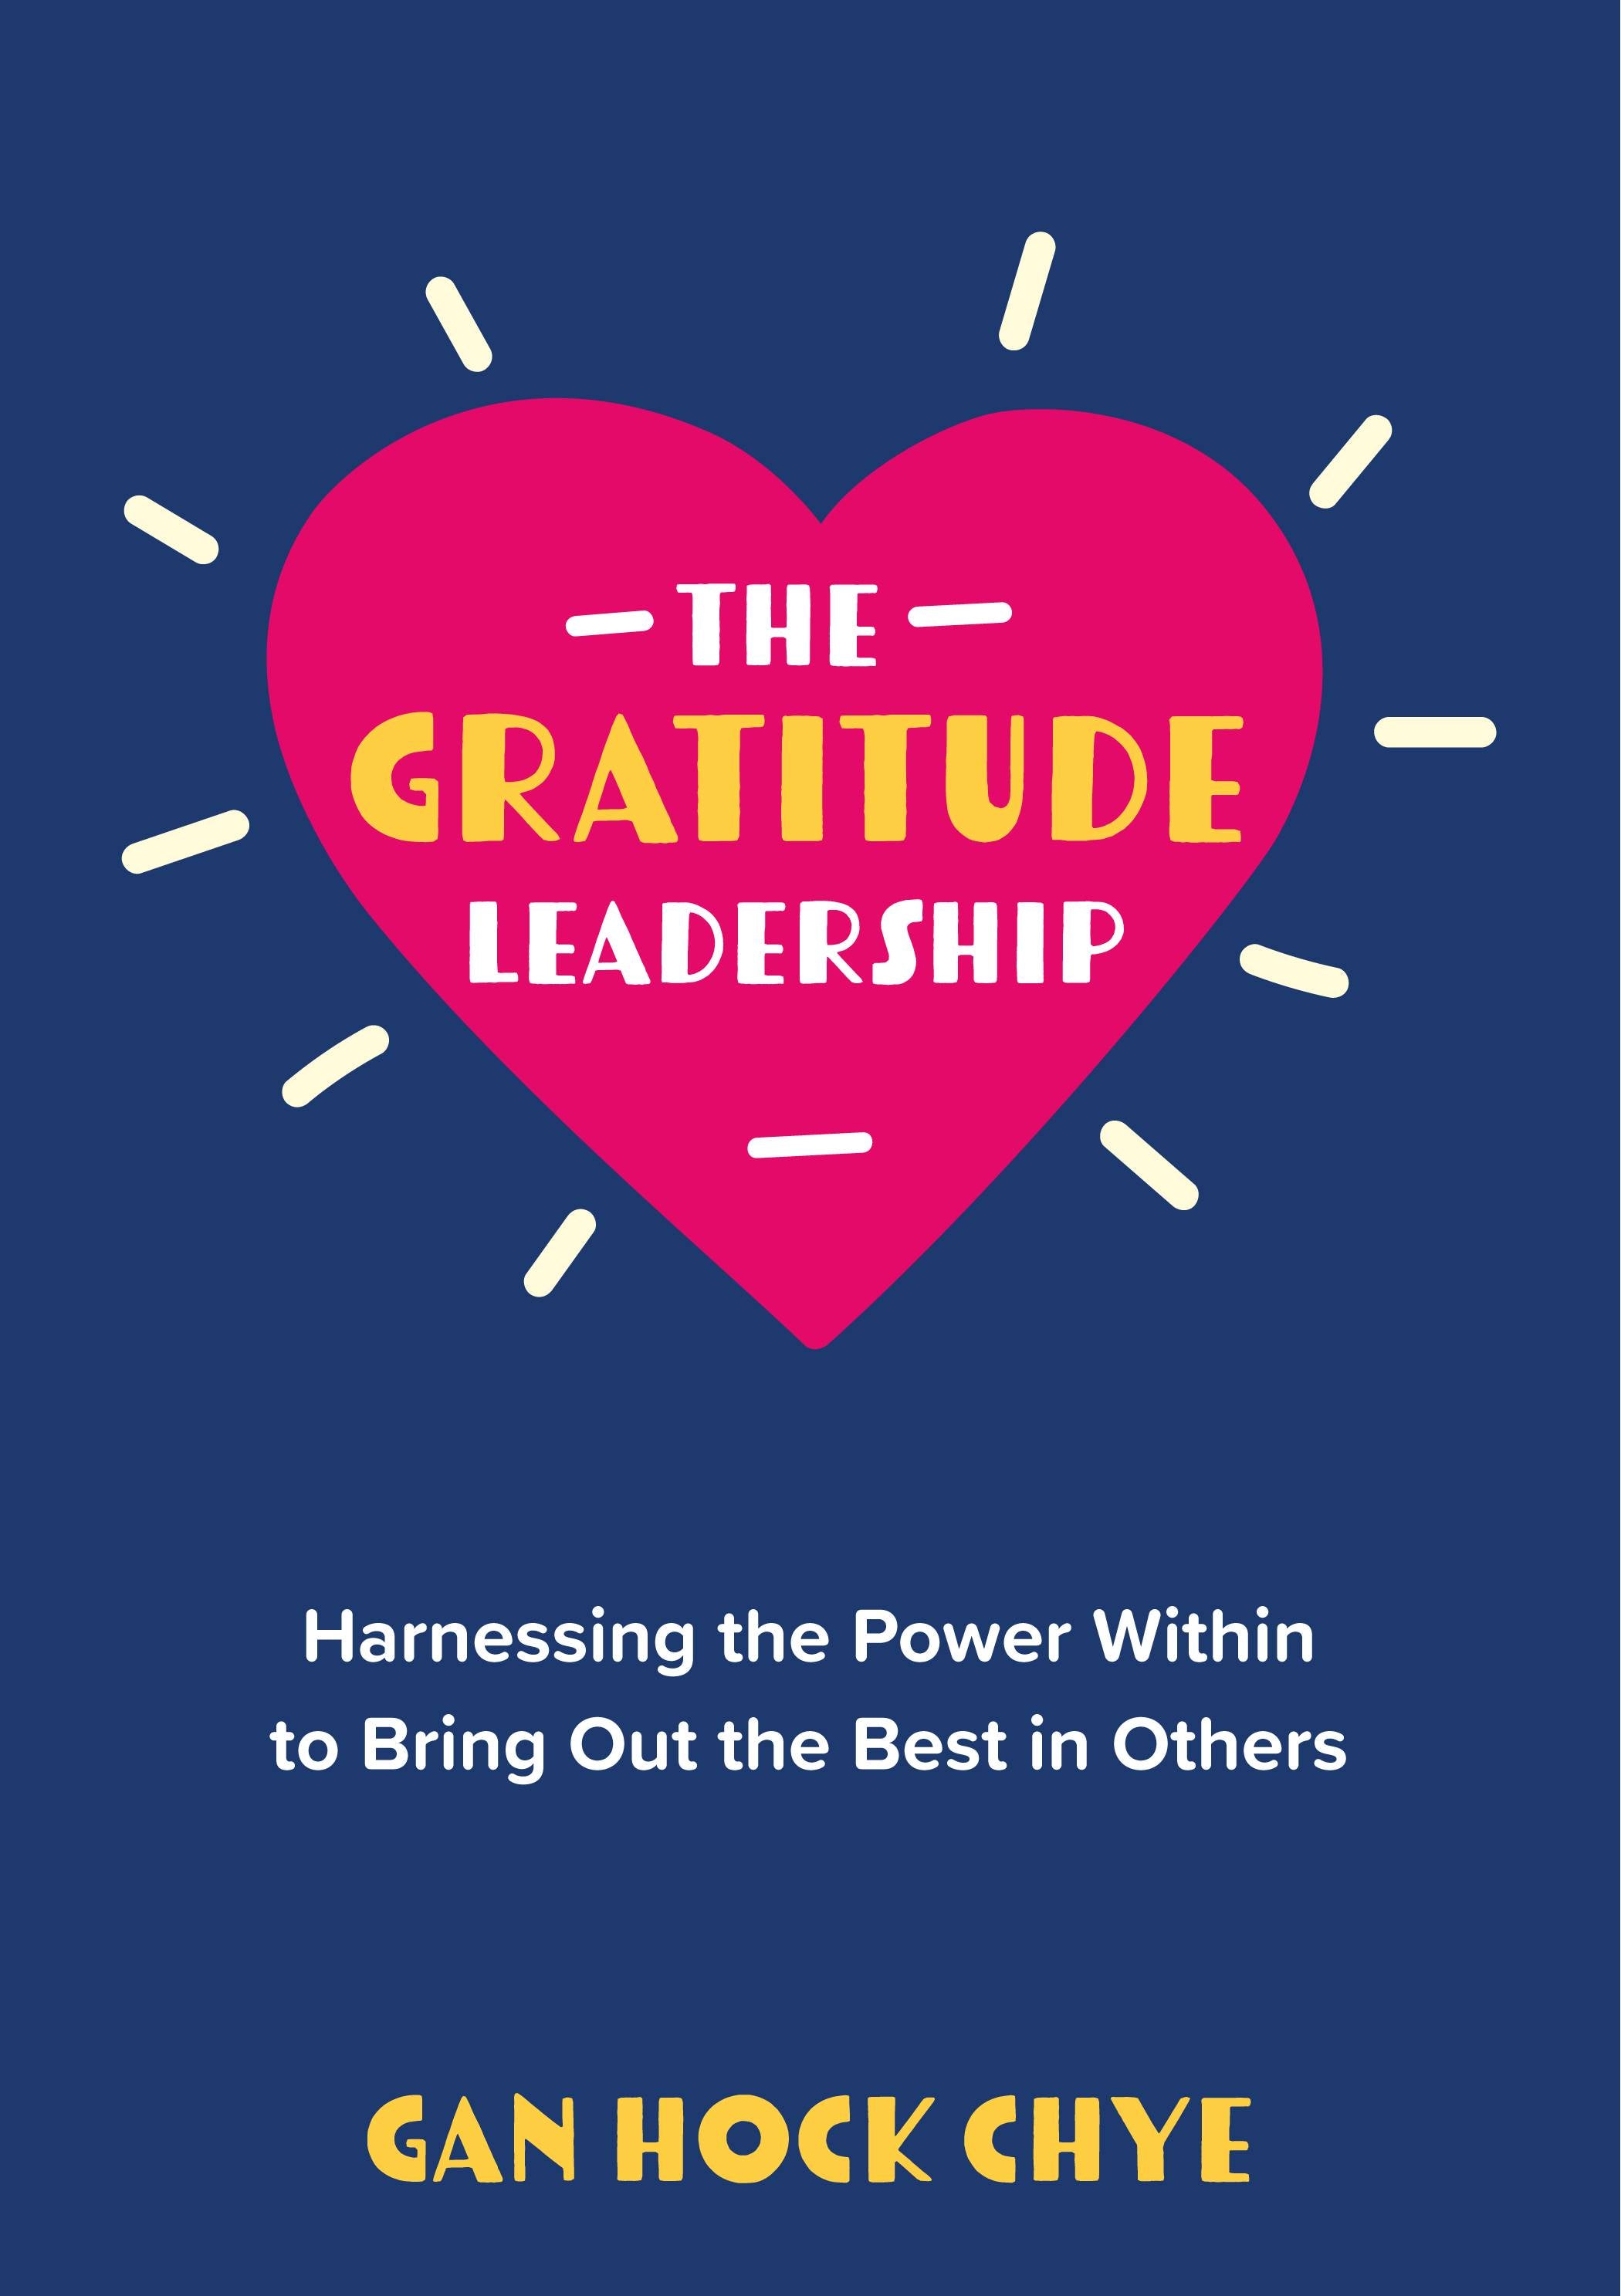 The Gratitude Leadership: Harnessing the Power Within to Bring Out the Best in Others